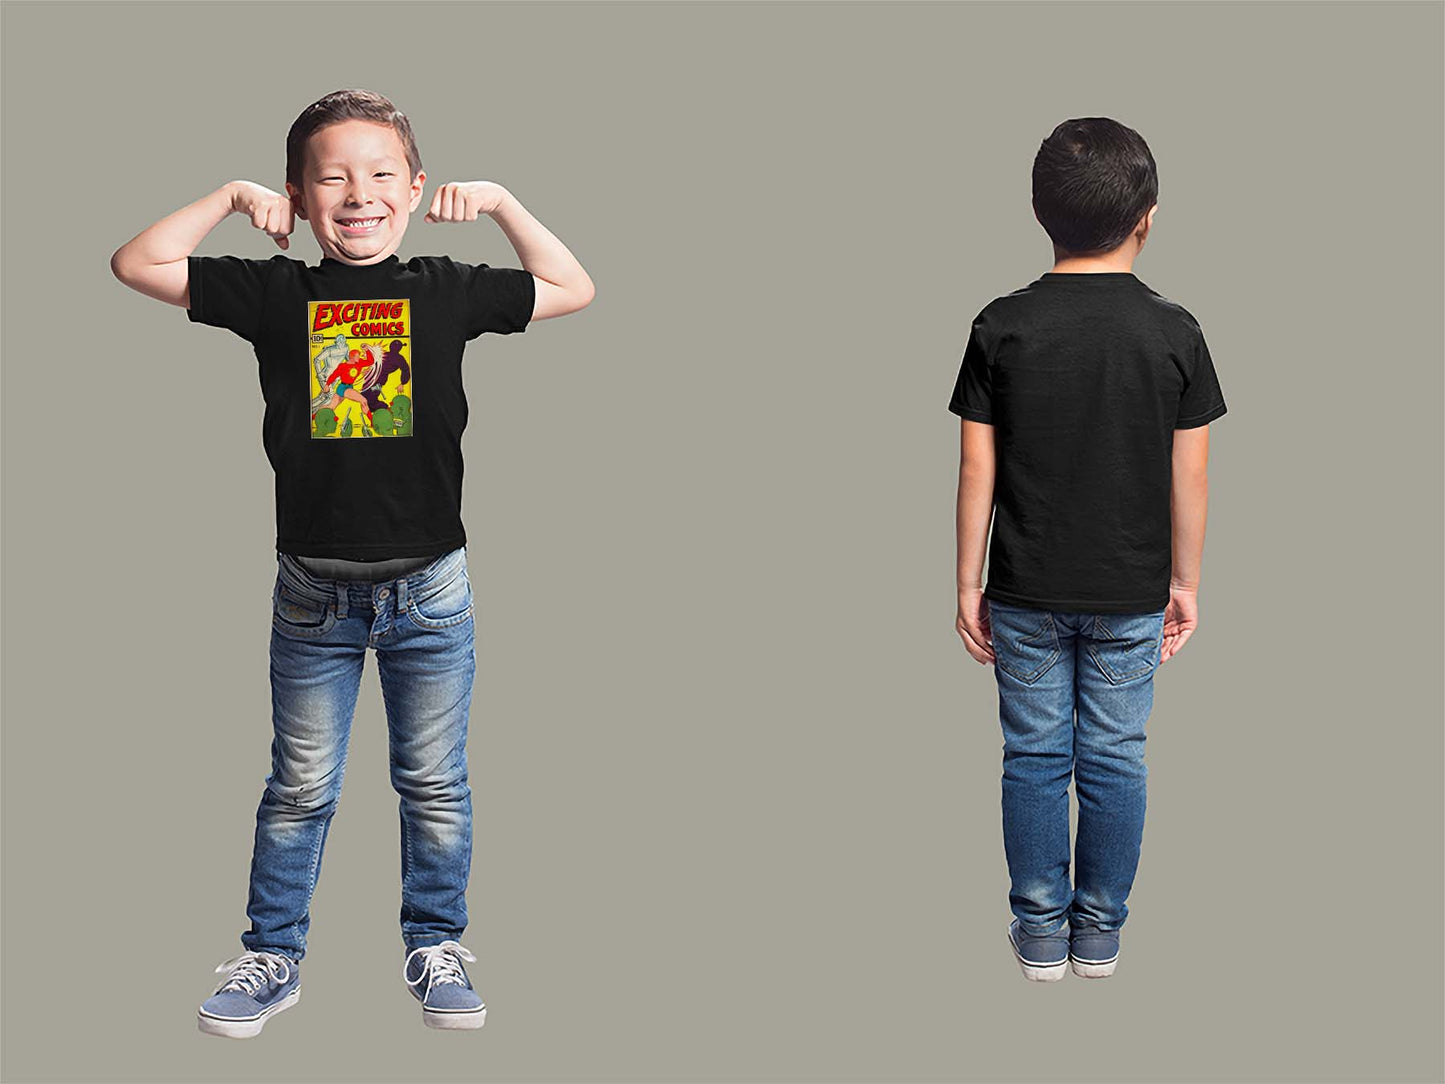 Exciting Comics No.1 Youth T-Shirt Youth Small Black